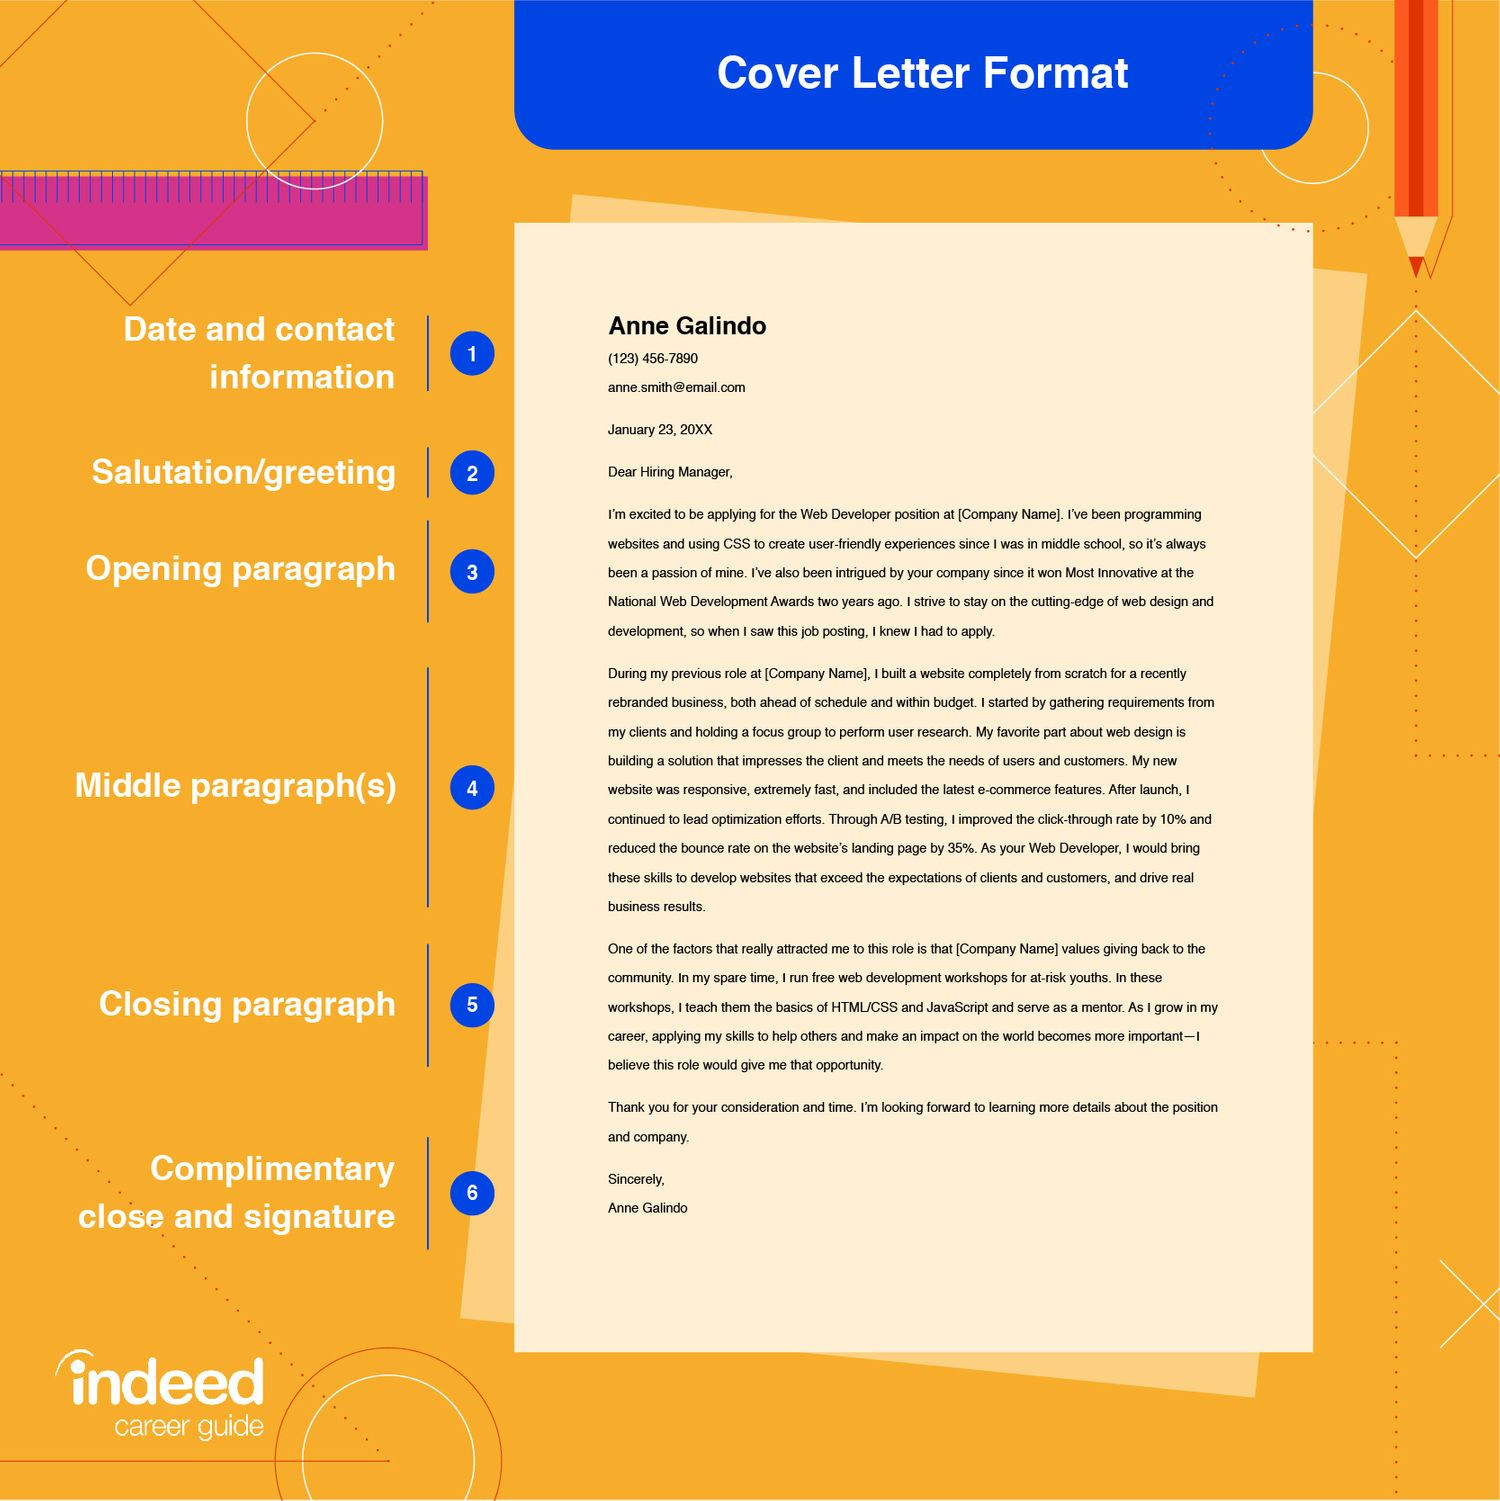 Sample Cover Letter and Resume Via Email How to Send An Email Cover Letter (with Example) Indeed.com